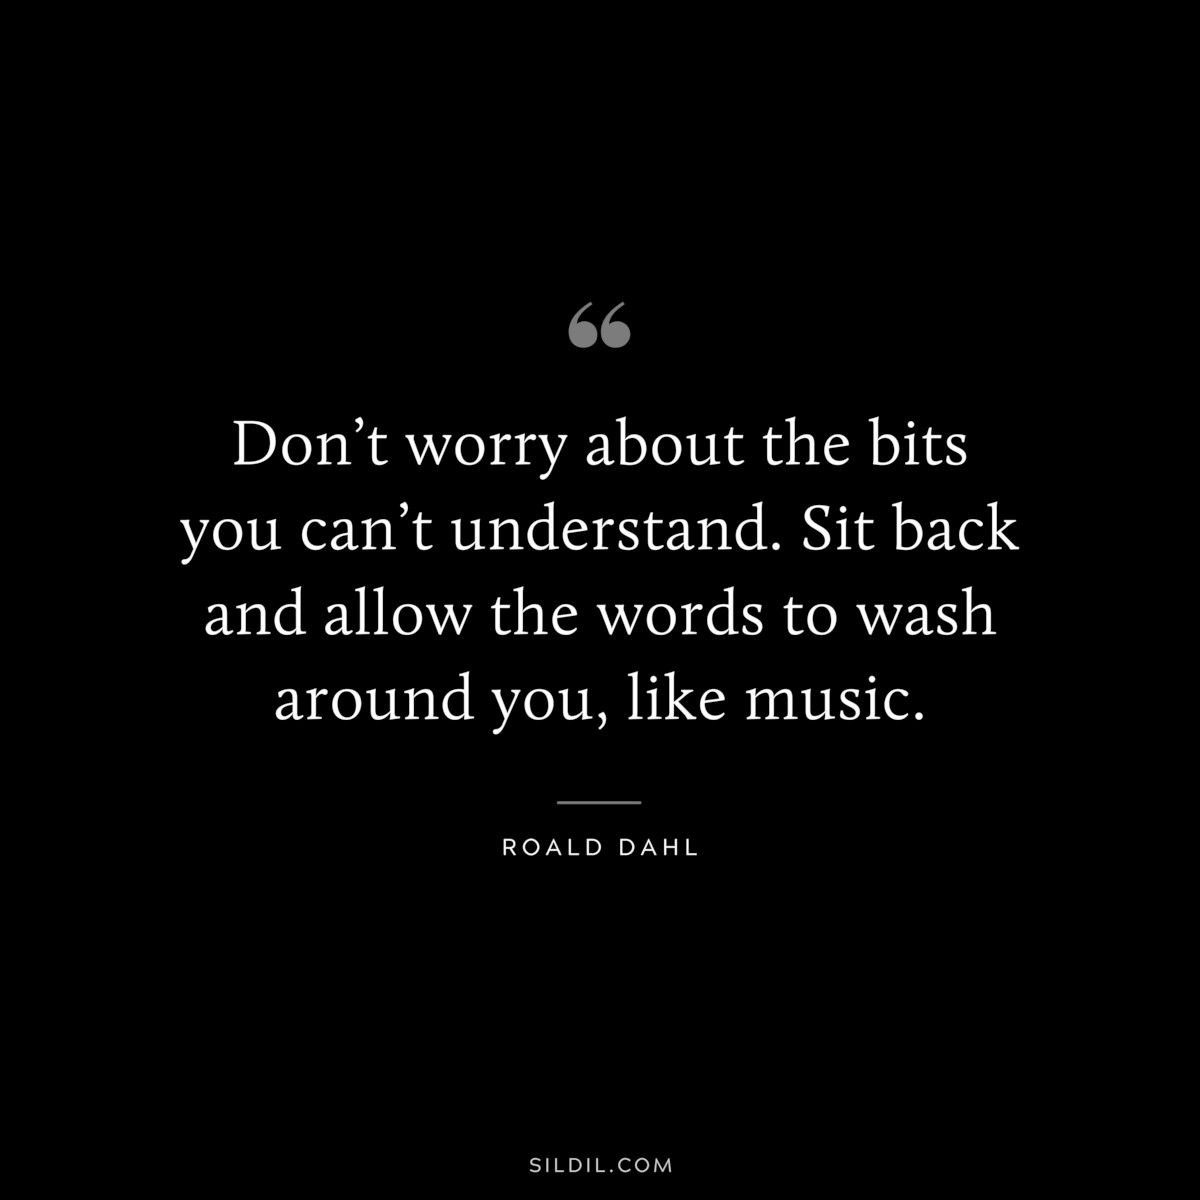 Don’t worry about the bits you can’t understand. Sit back and allow the words to wash around you, like music. ― Roald Dahl